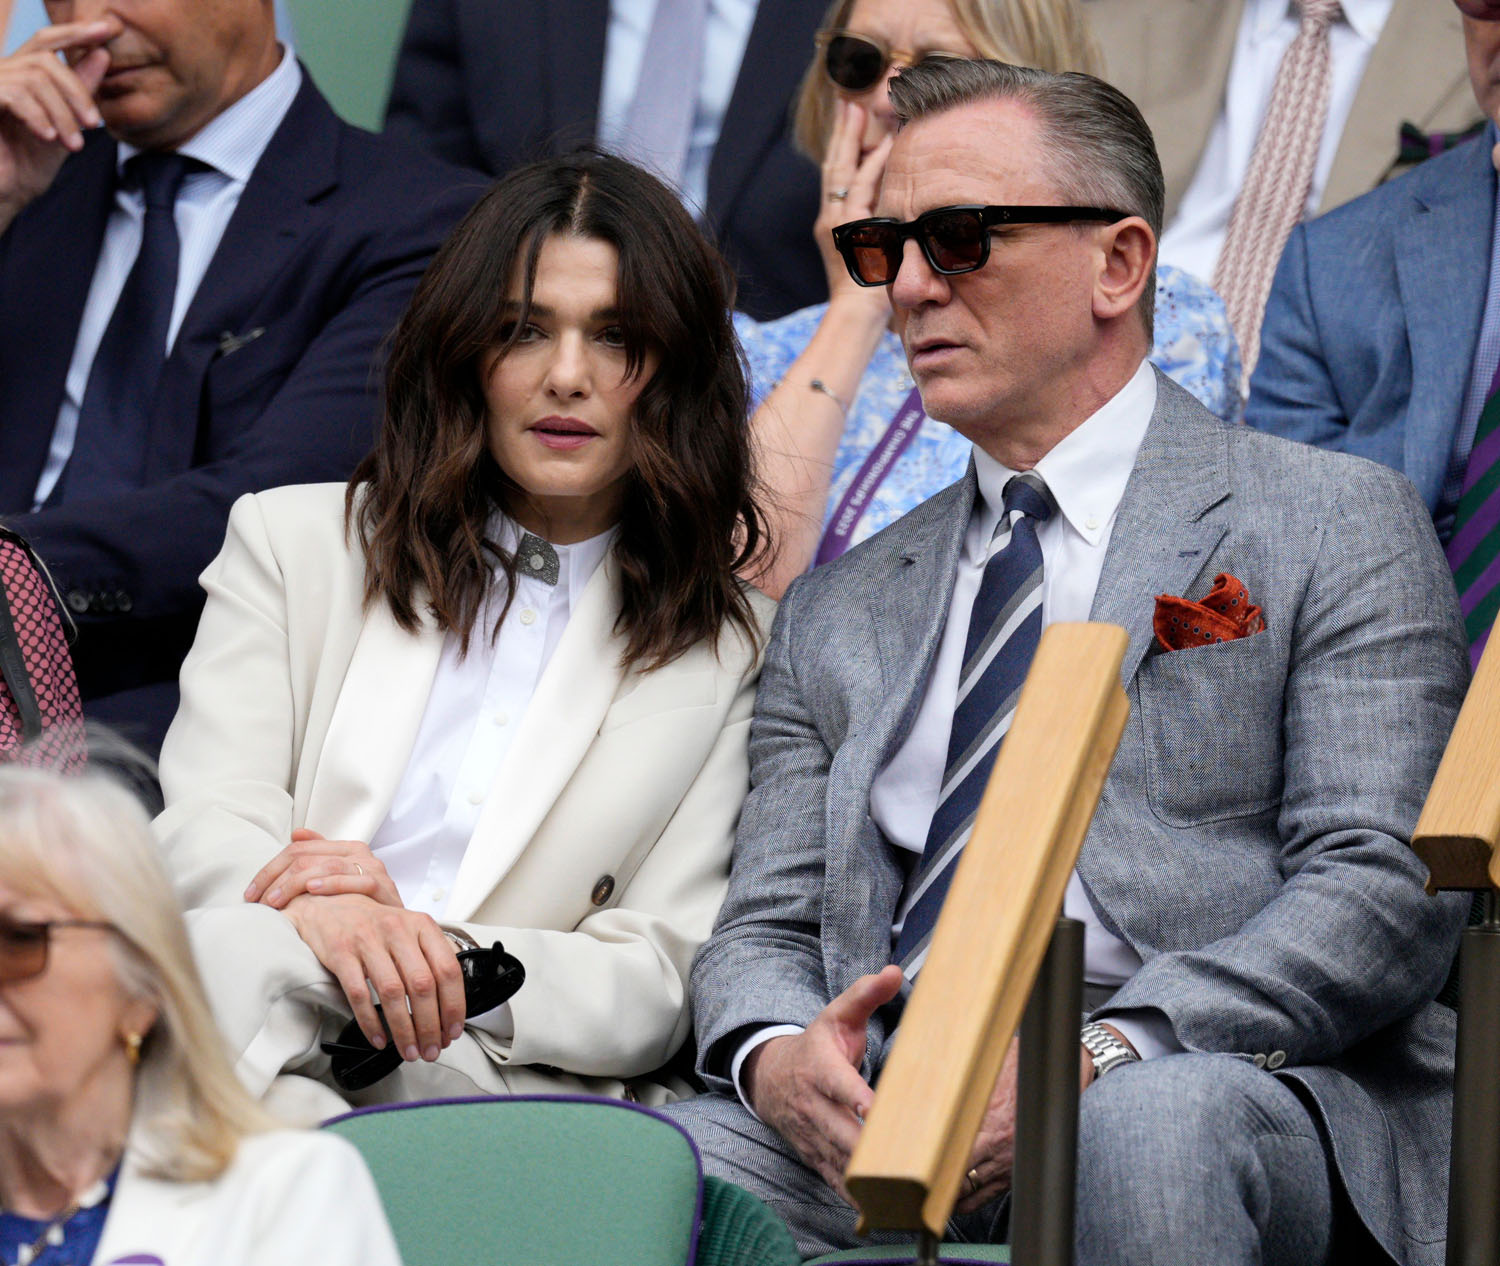 Our parents, Daniel Craig and Rachel Weisz, look amazing in his and her ...